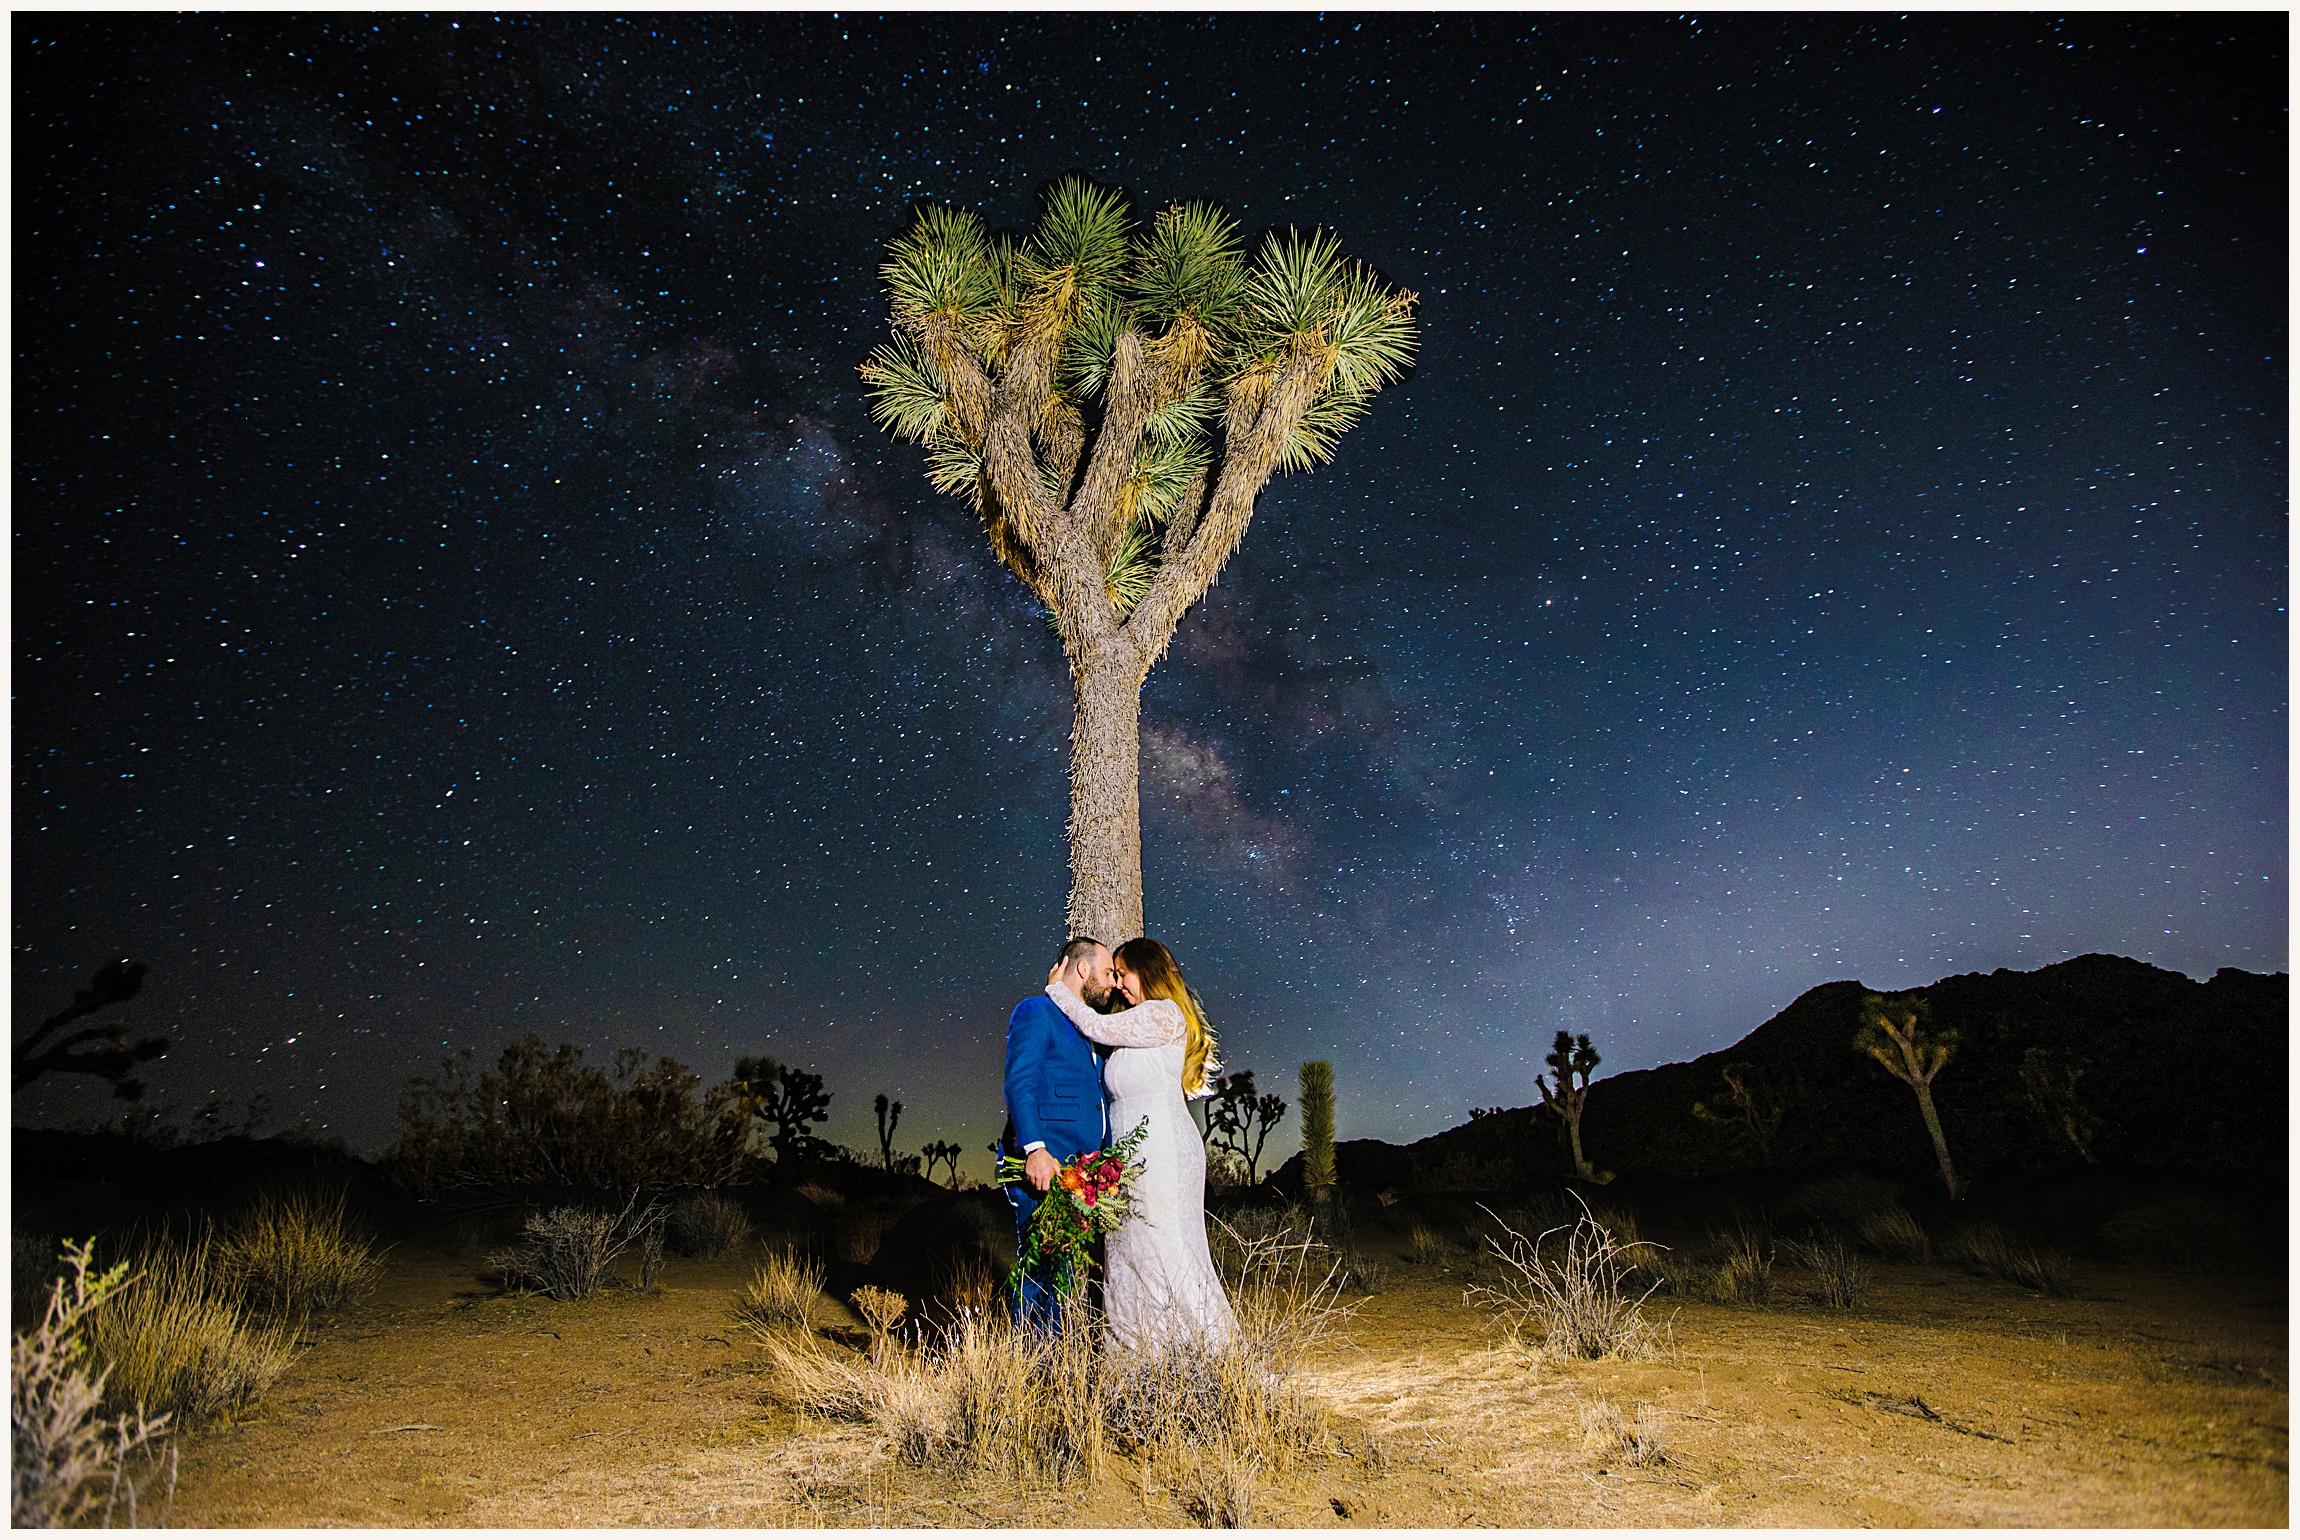 Photo of bride and groom in Joshua Tree at night with Milky Way sky